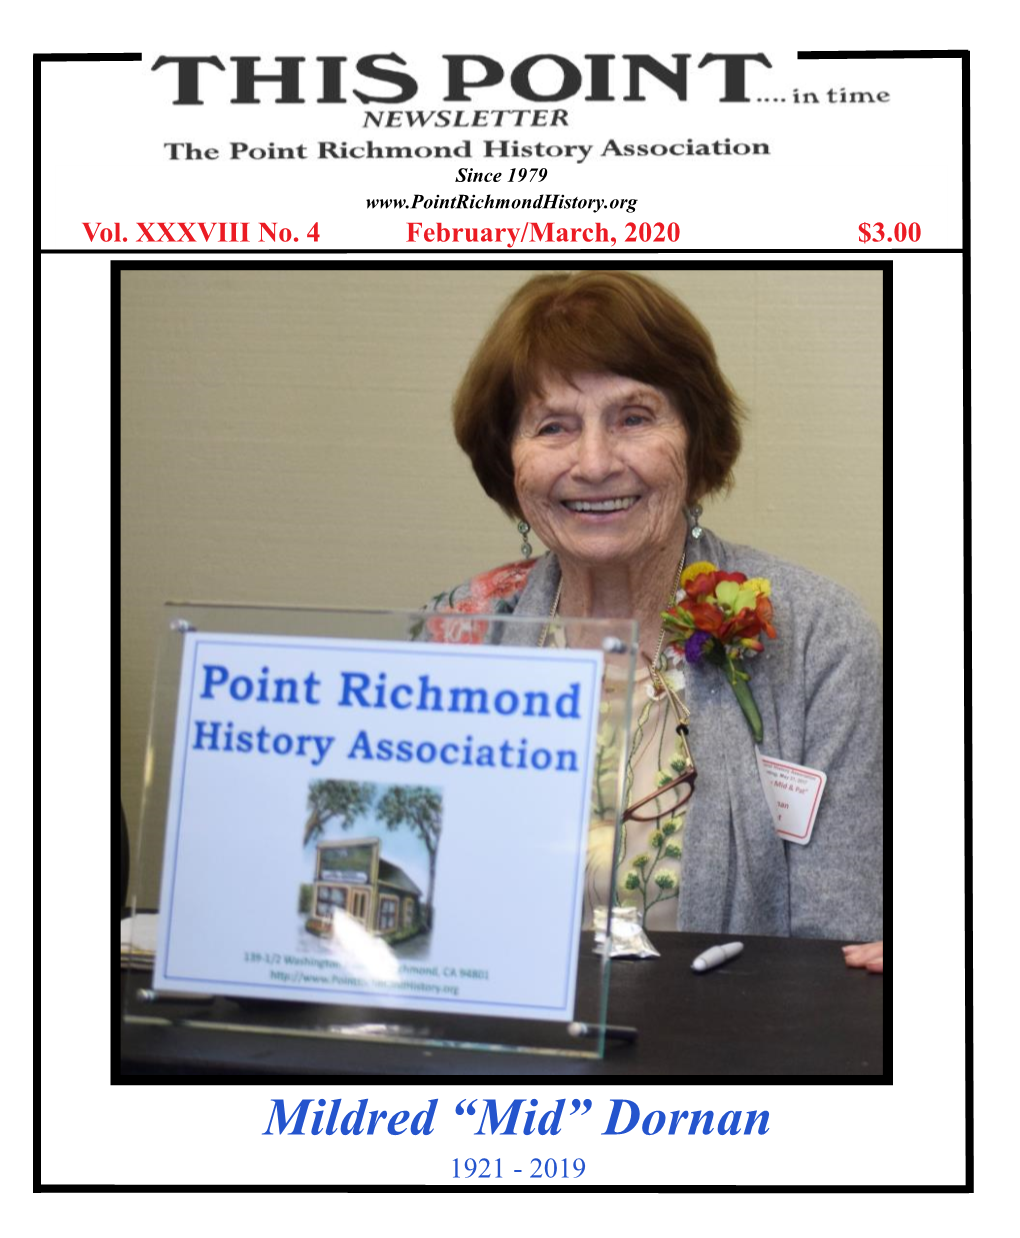 Mildred “Mid” Dornan 1921 - 2019 Mid Dornan Died at the Age of 98